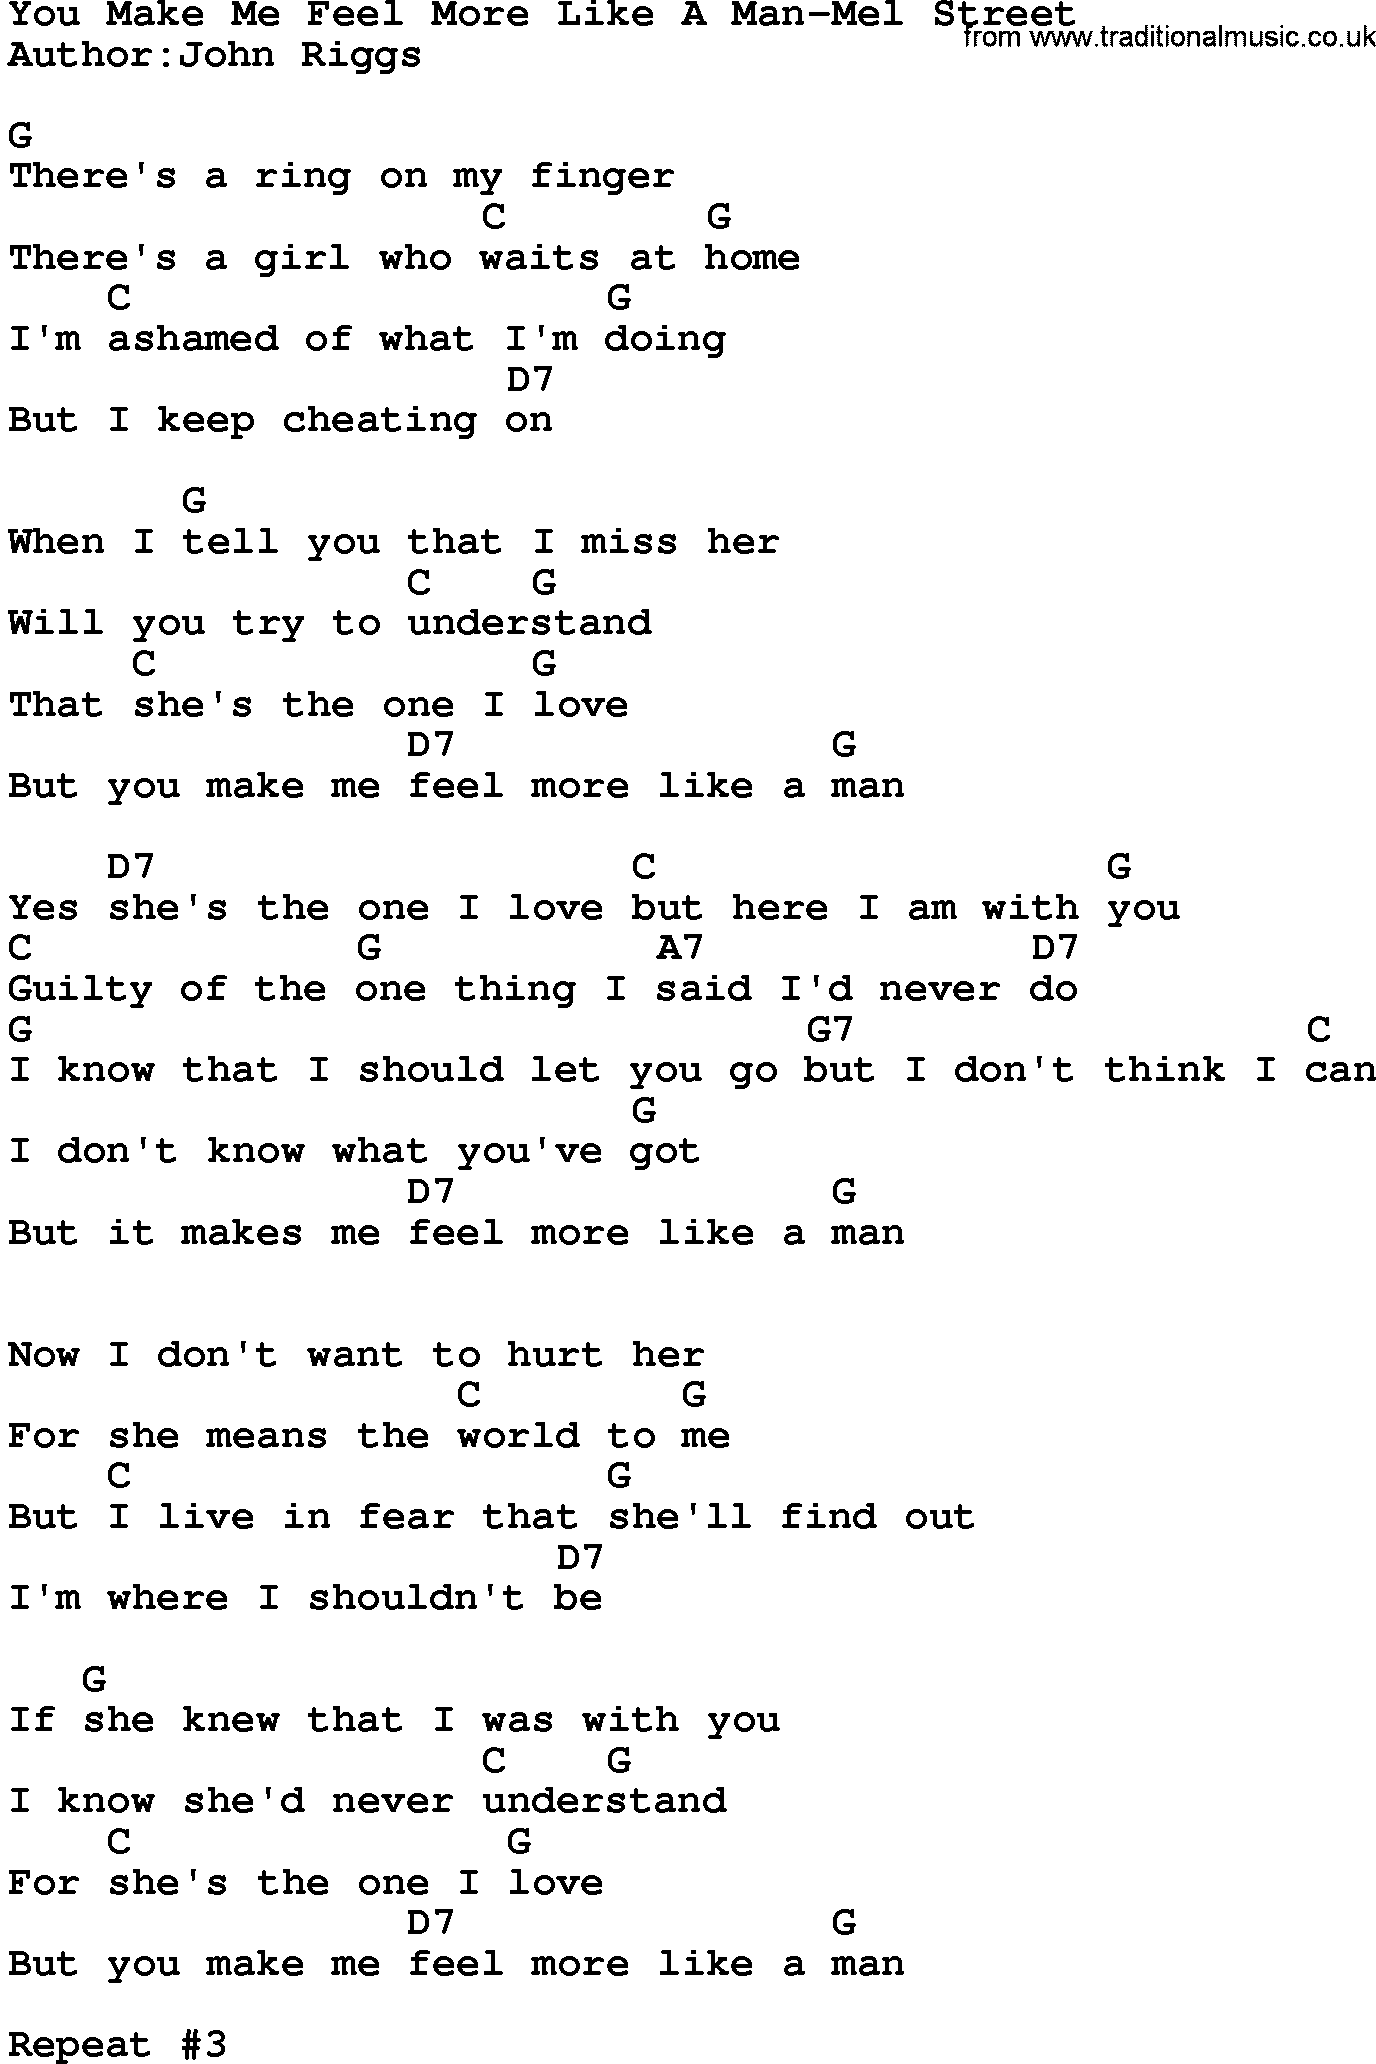 Country music song: You Make Me Feel More Like A Man-Mel Street lyrics and chords